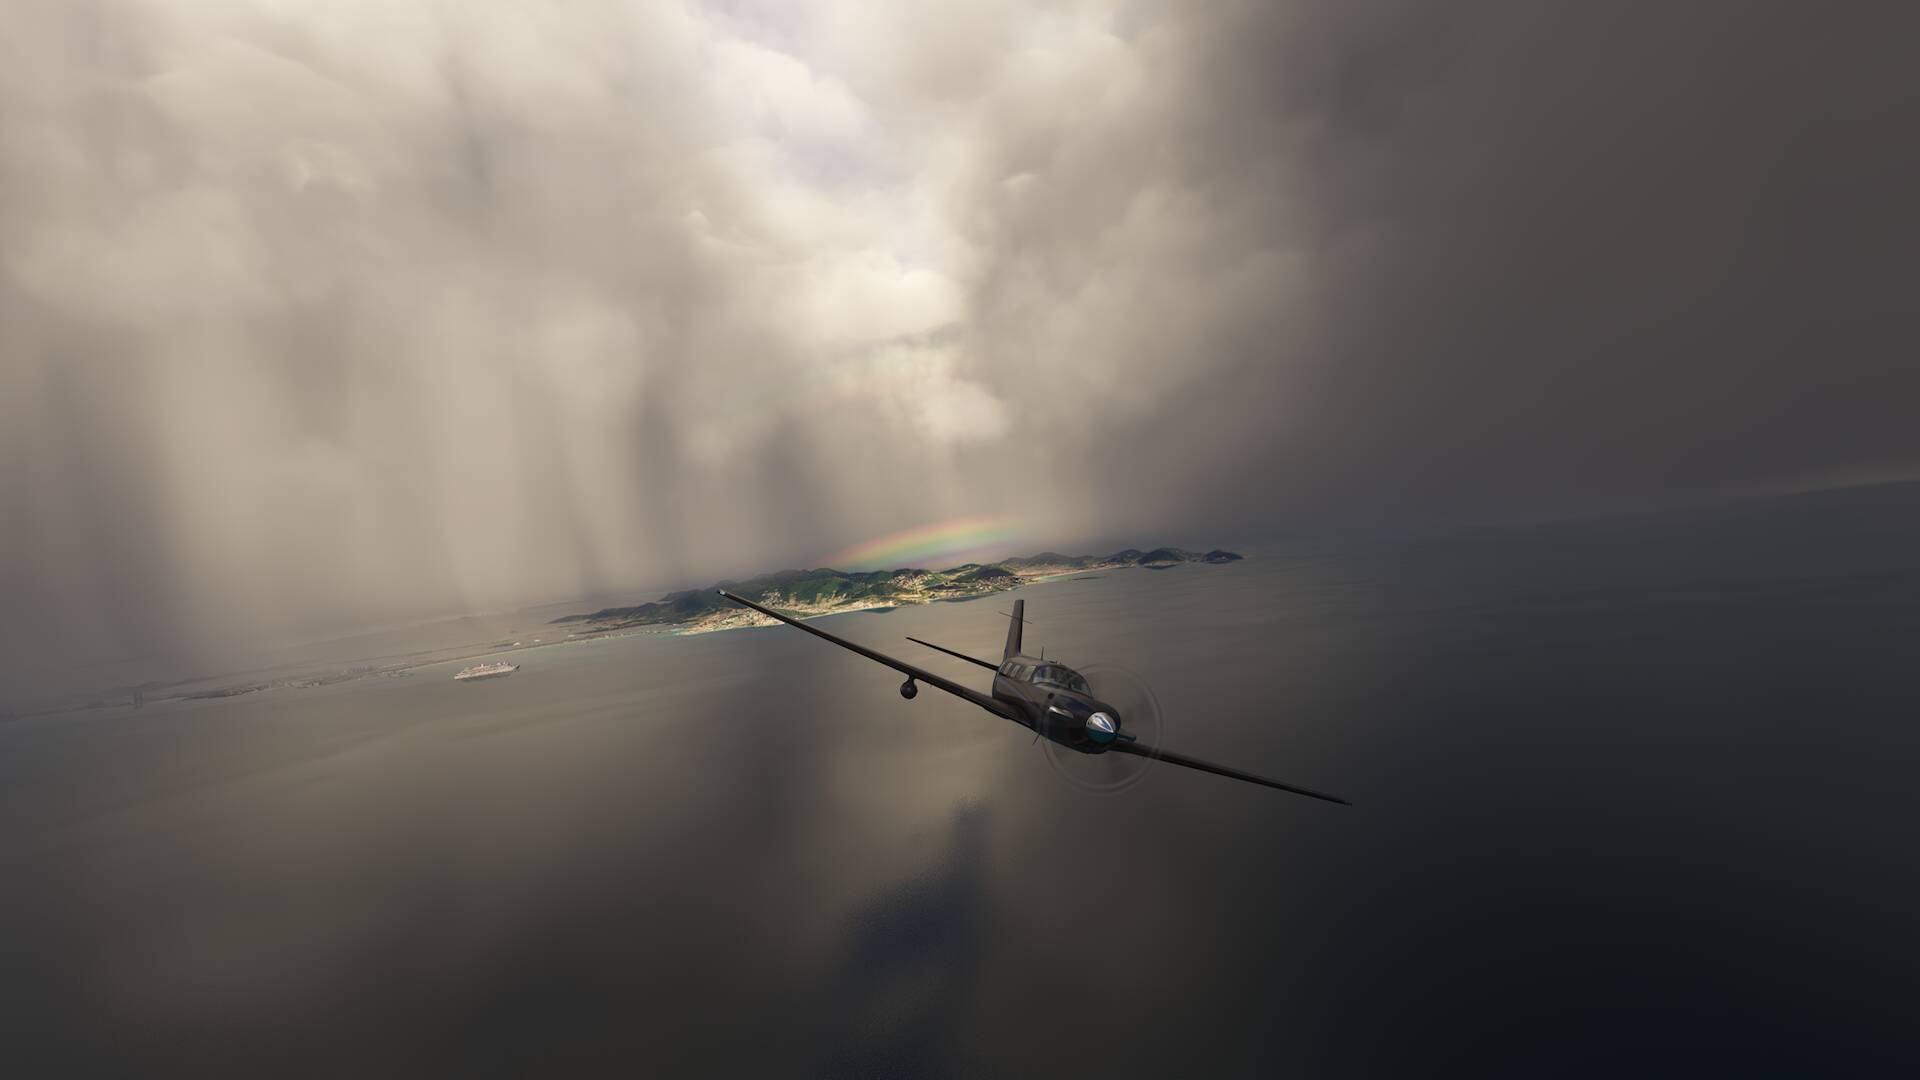 A turbo prop in black paint scheme banks left whilst flying away from an island, with stormy clouds and a rainbow visible in the distance